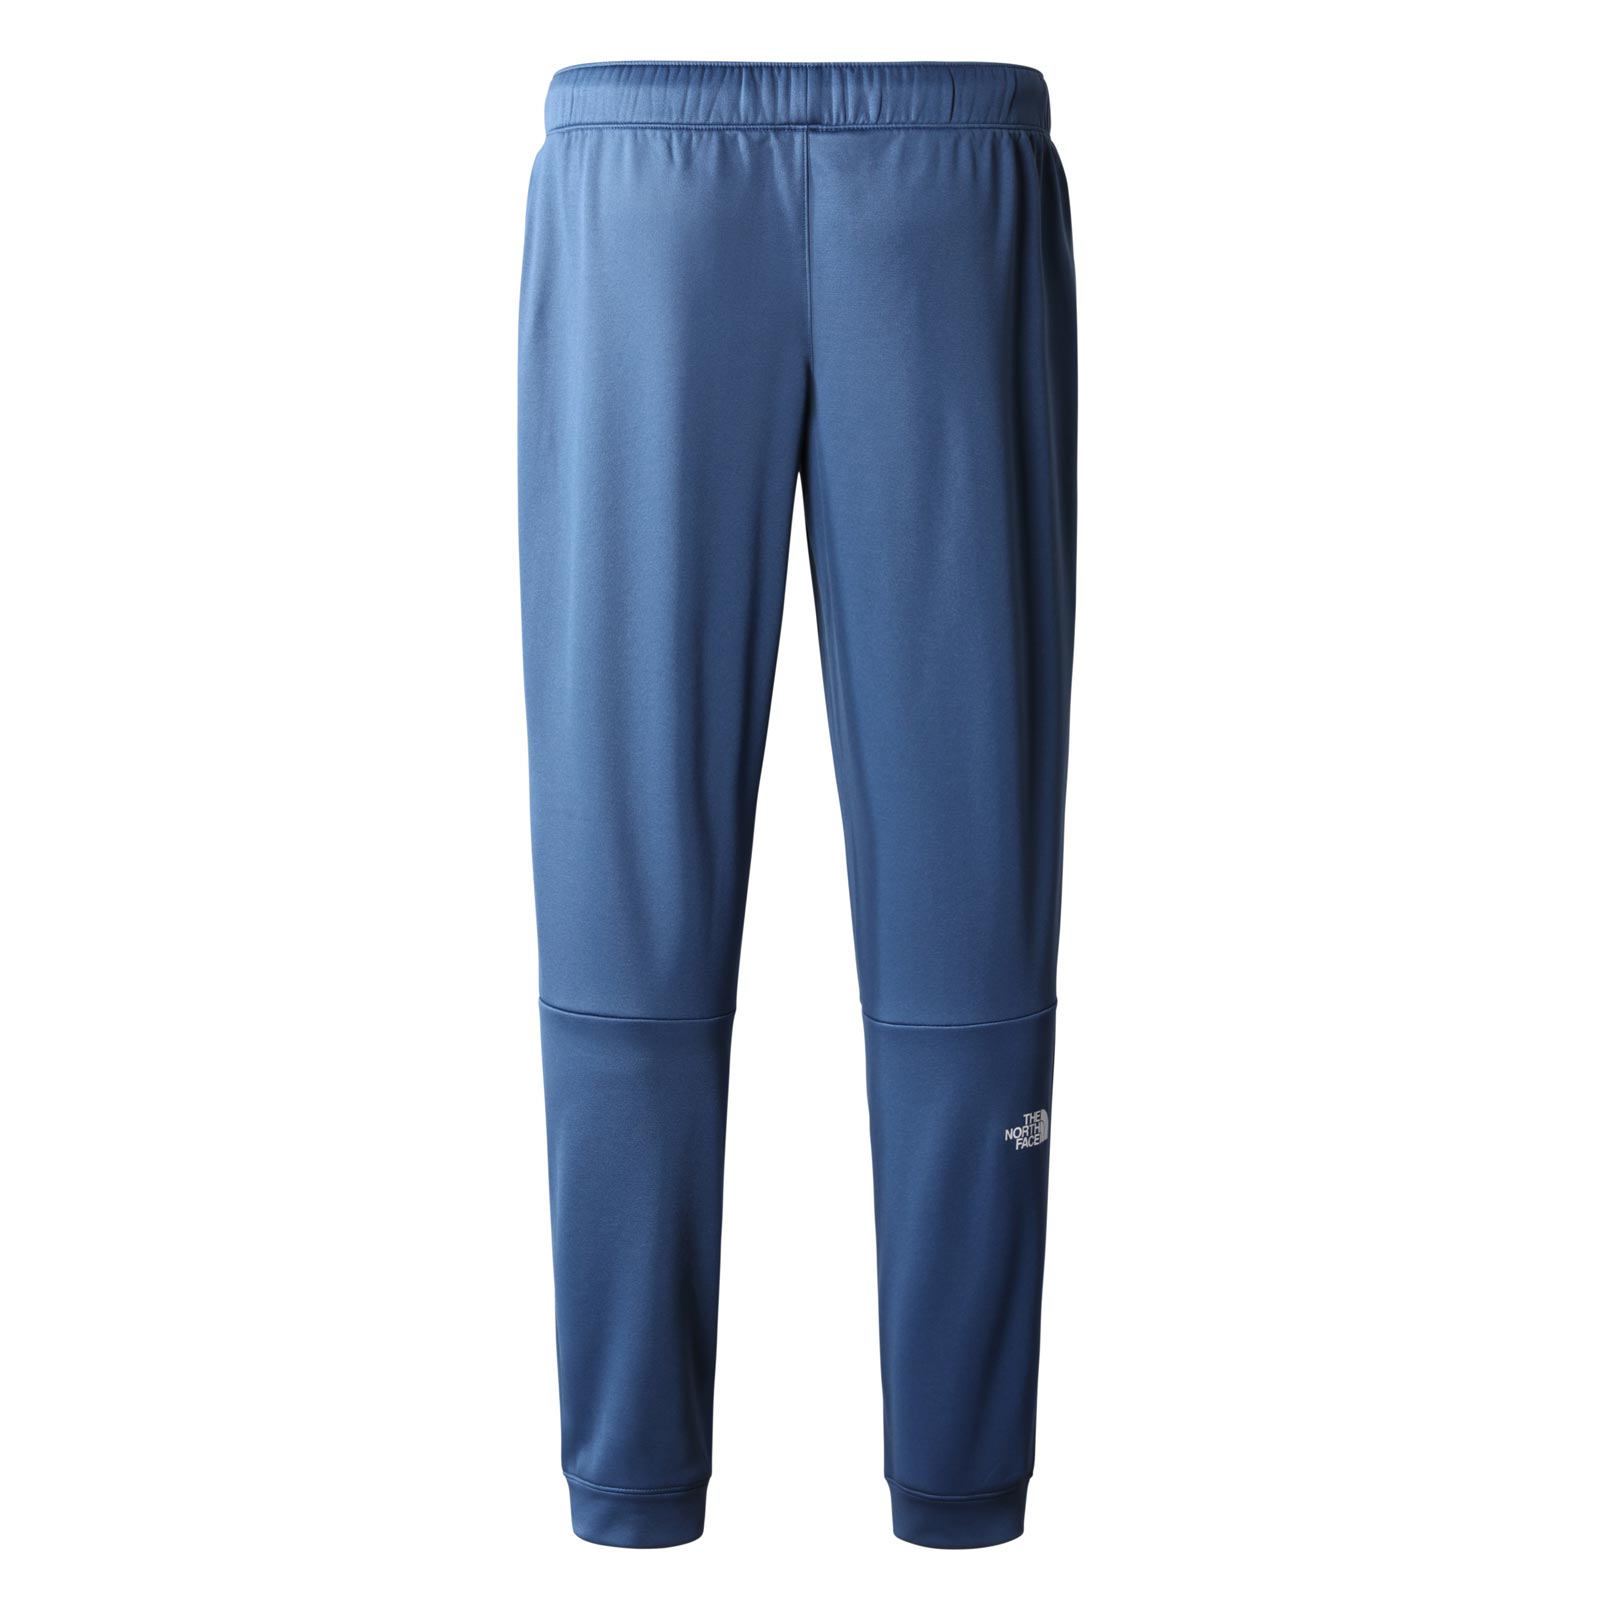 THE NORTH FACE MENS REAXION FLEECE JOGGERS